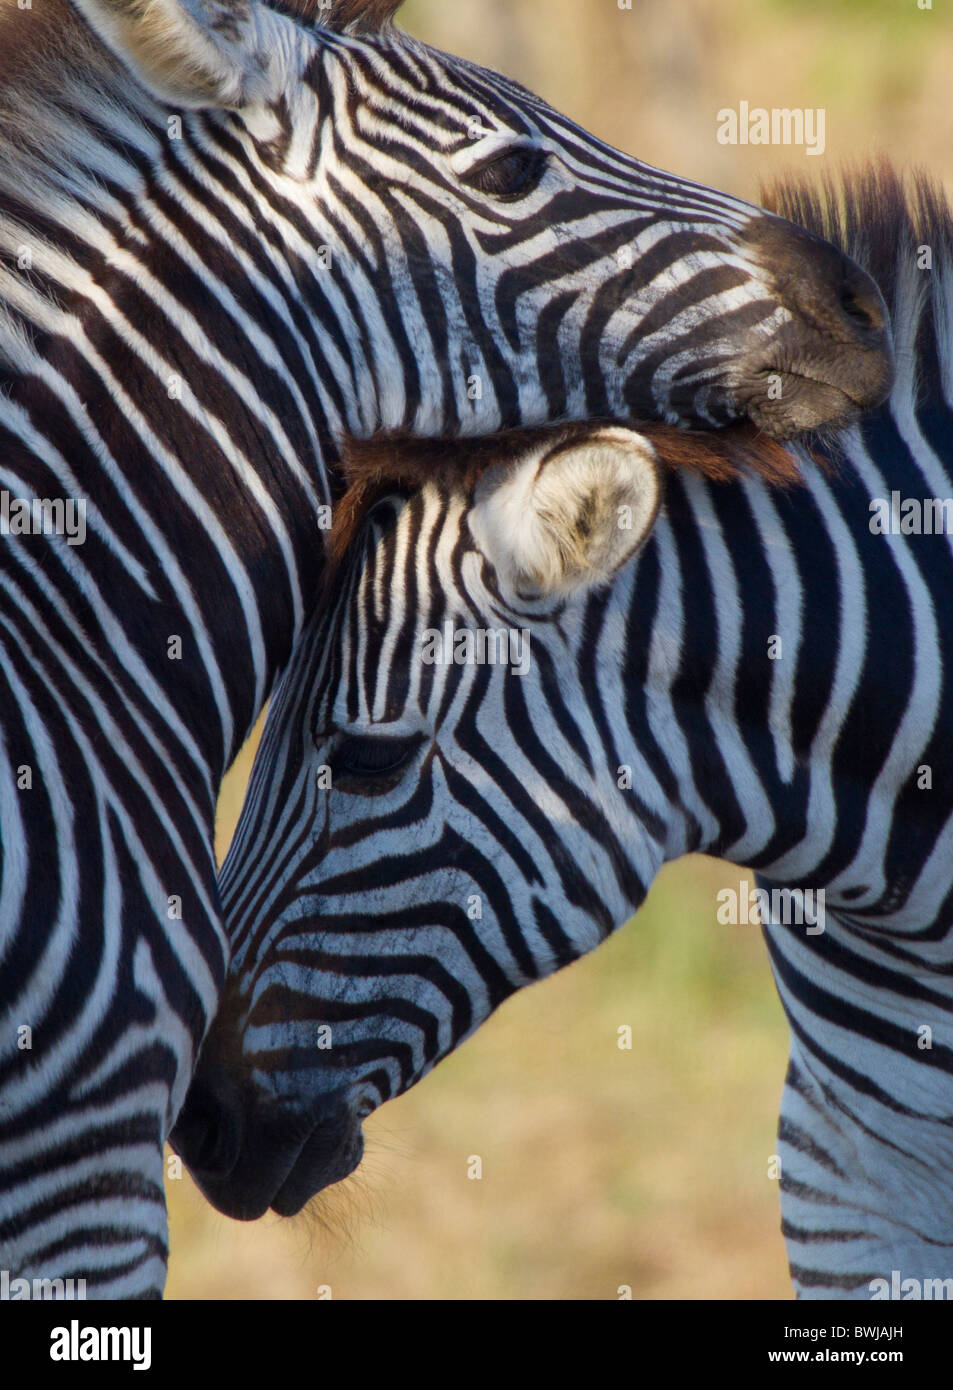 Burchell's Zebras Nuzzling Each Other, Kruger National Park, South Africa Stock Photo